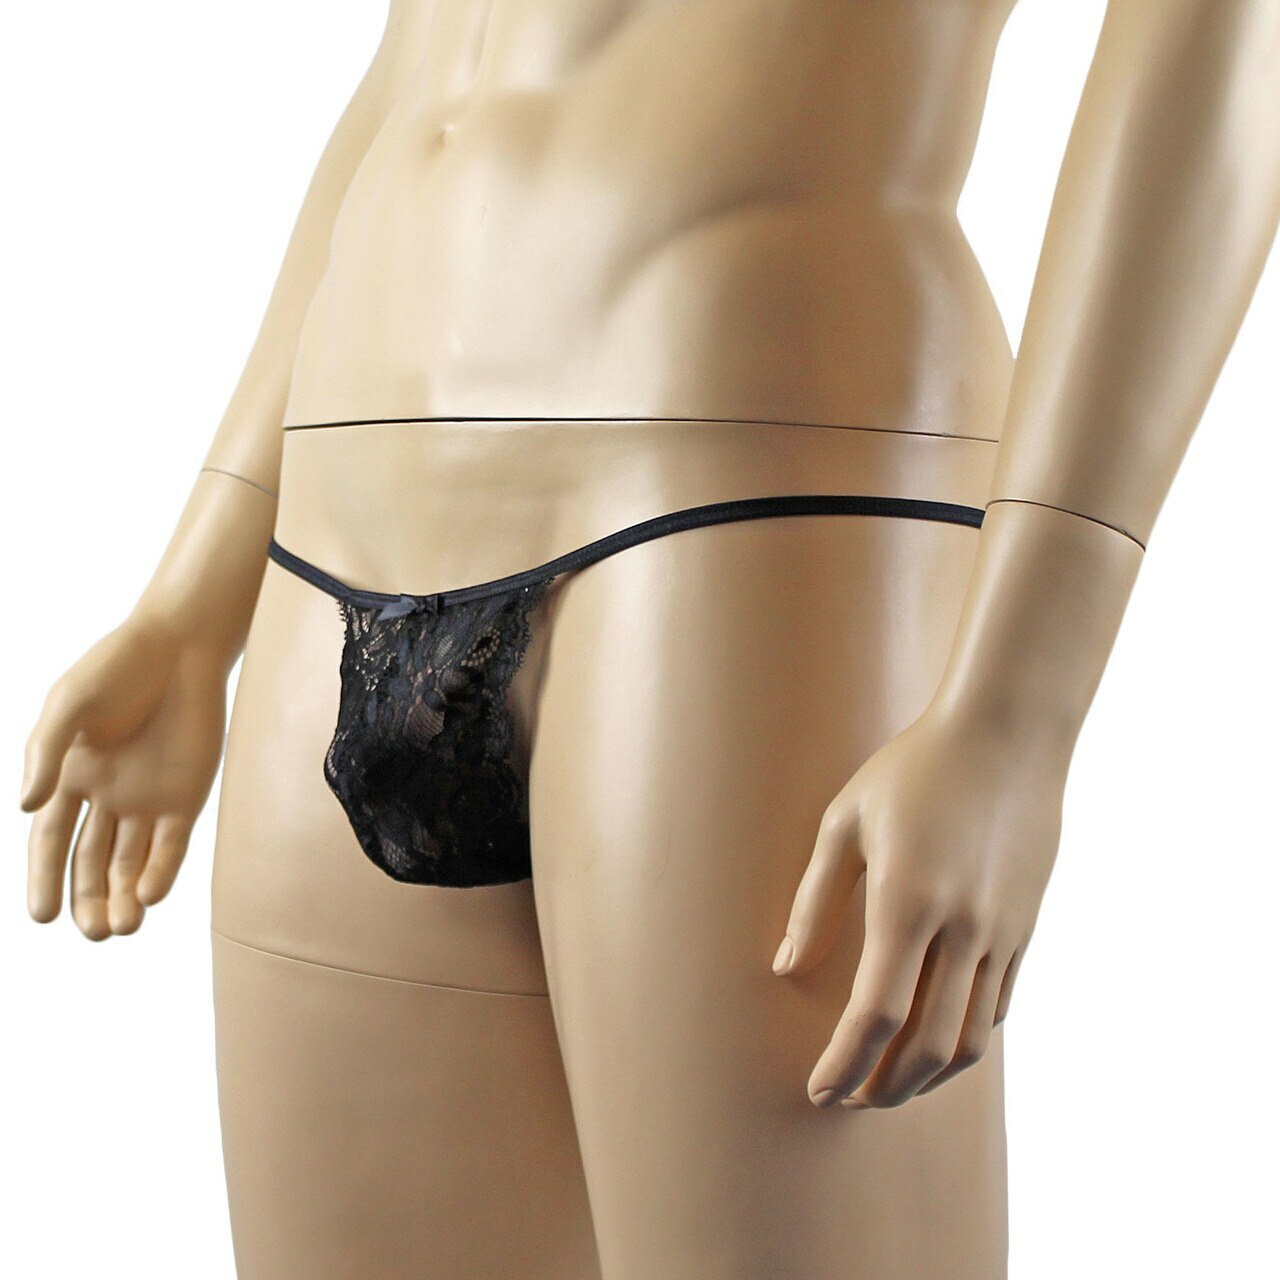 Mens Kristy Sexy Lace Pouch G string Panty Male Lingerie Black